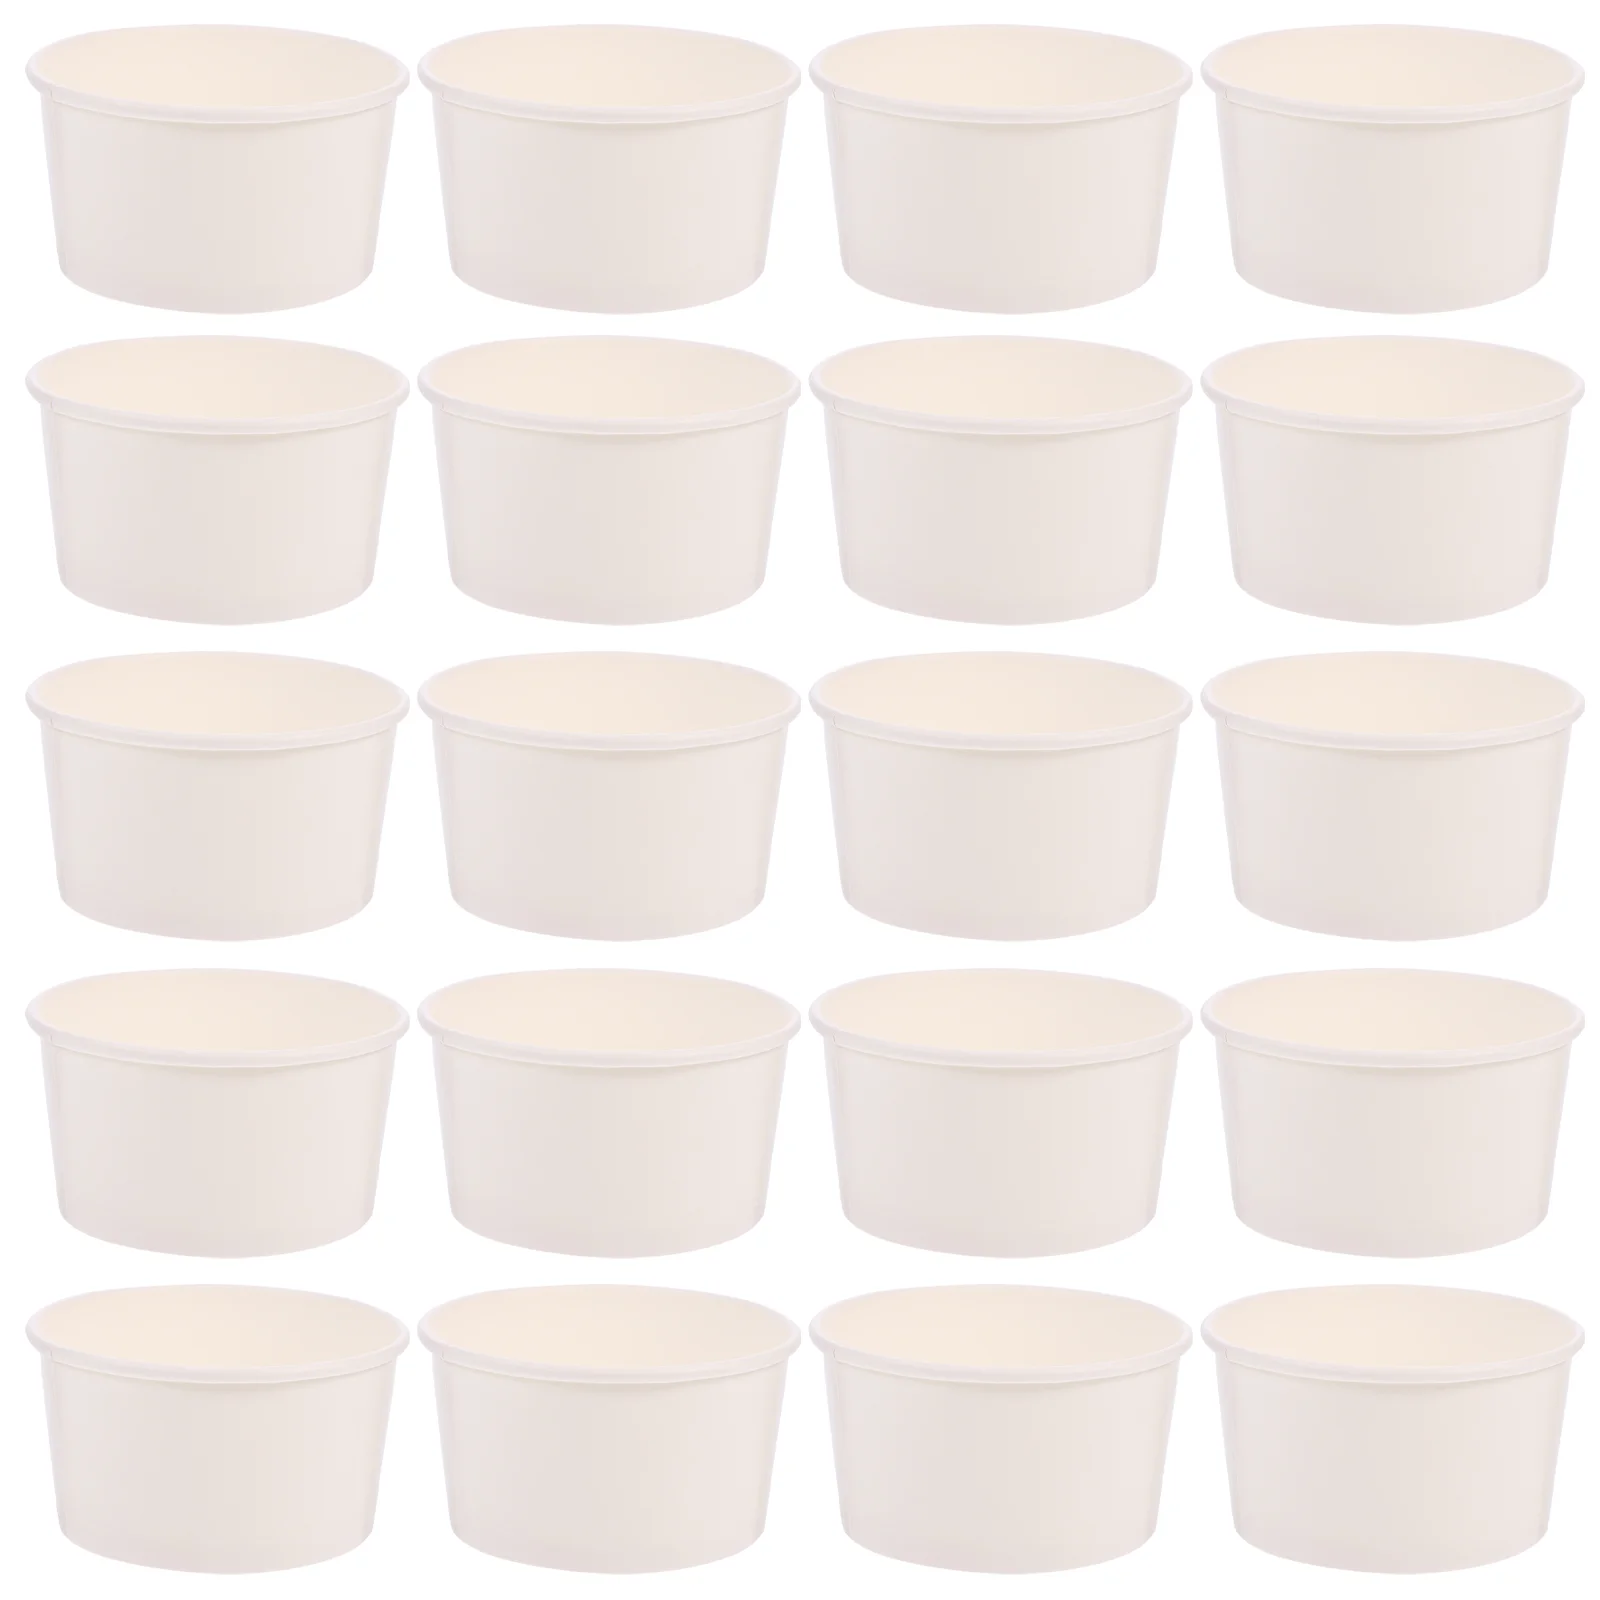 

100 Pcs Ice Cream Cups Dessert Container Yogurt Paper Bowls Mousse Cake Jelly Snack